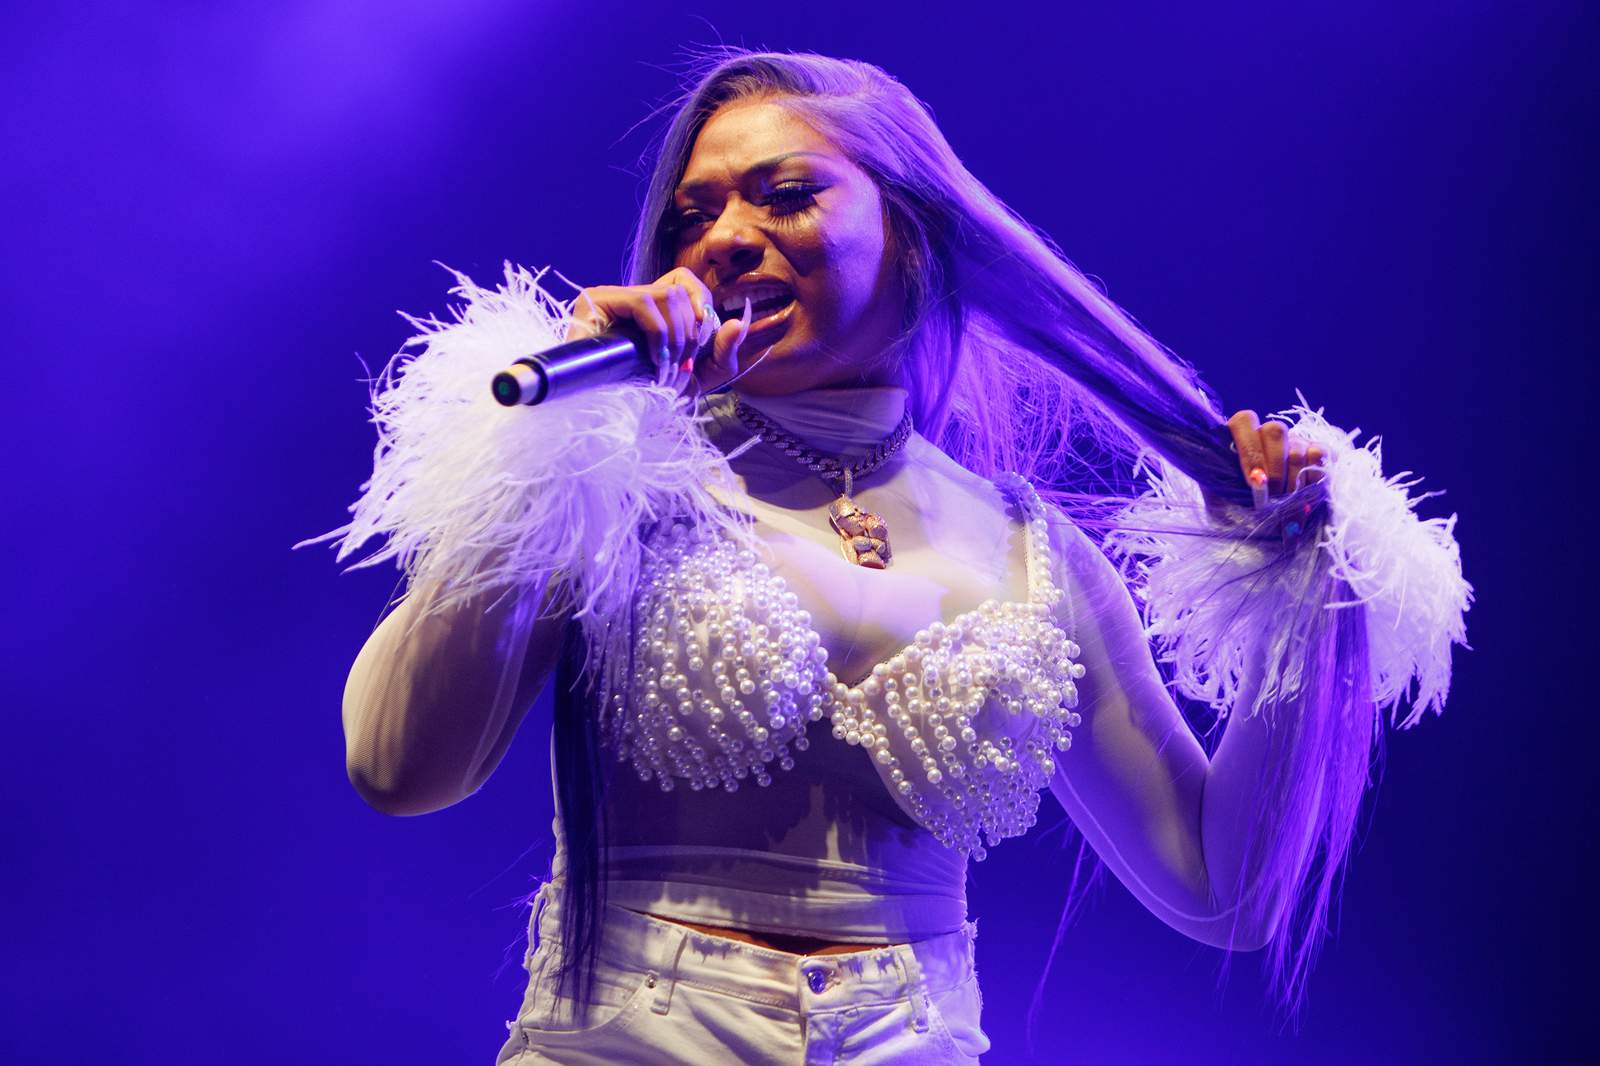 Houston rapper Megan Thee Stallion says she was intentionally shot in Hollywood Hills Sunday